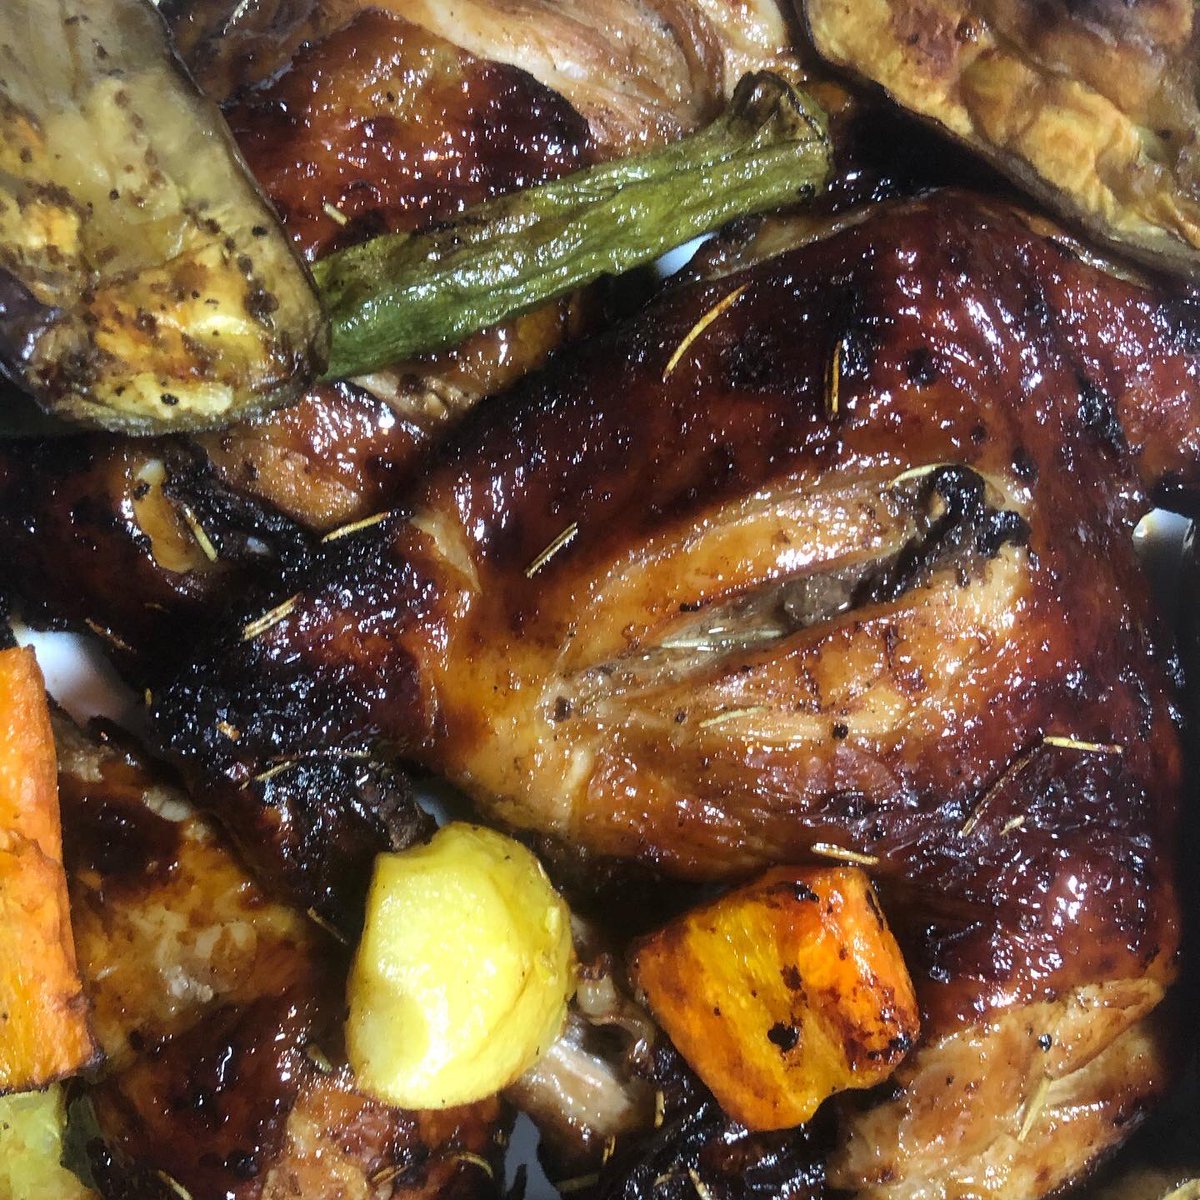 Grilled chicken and Vegetables using an Air Fryer

#food #foodie #foodieph #foodphotography #grilledchicken #foodblog #jeansvlogs